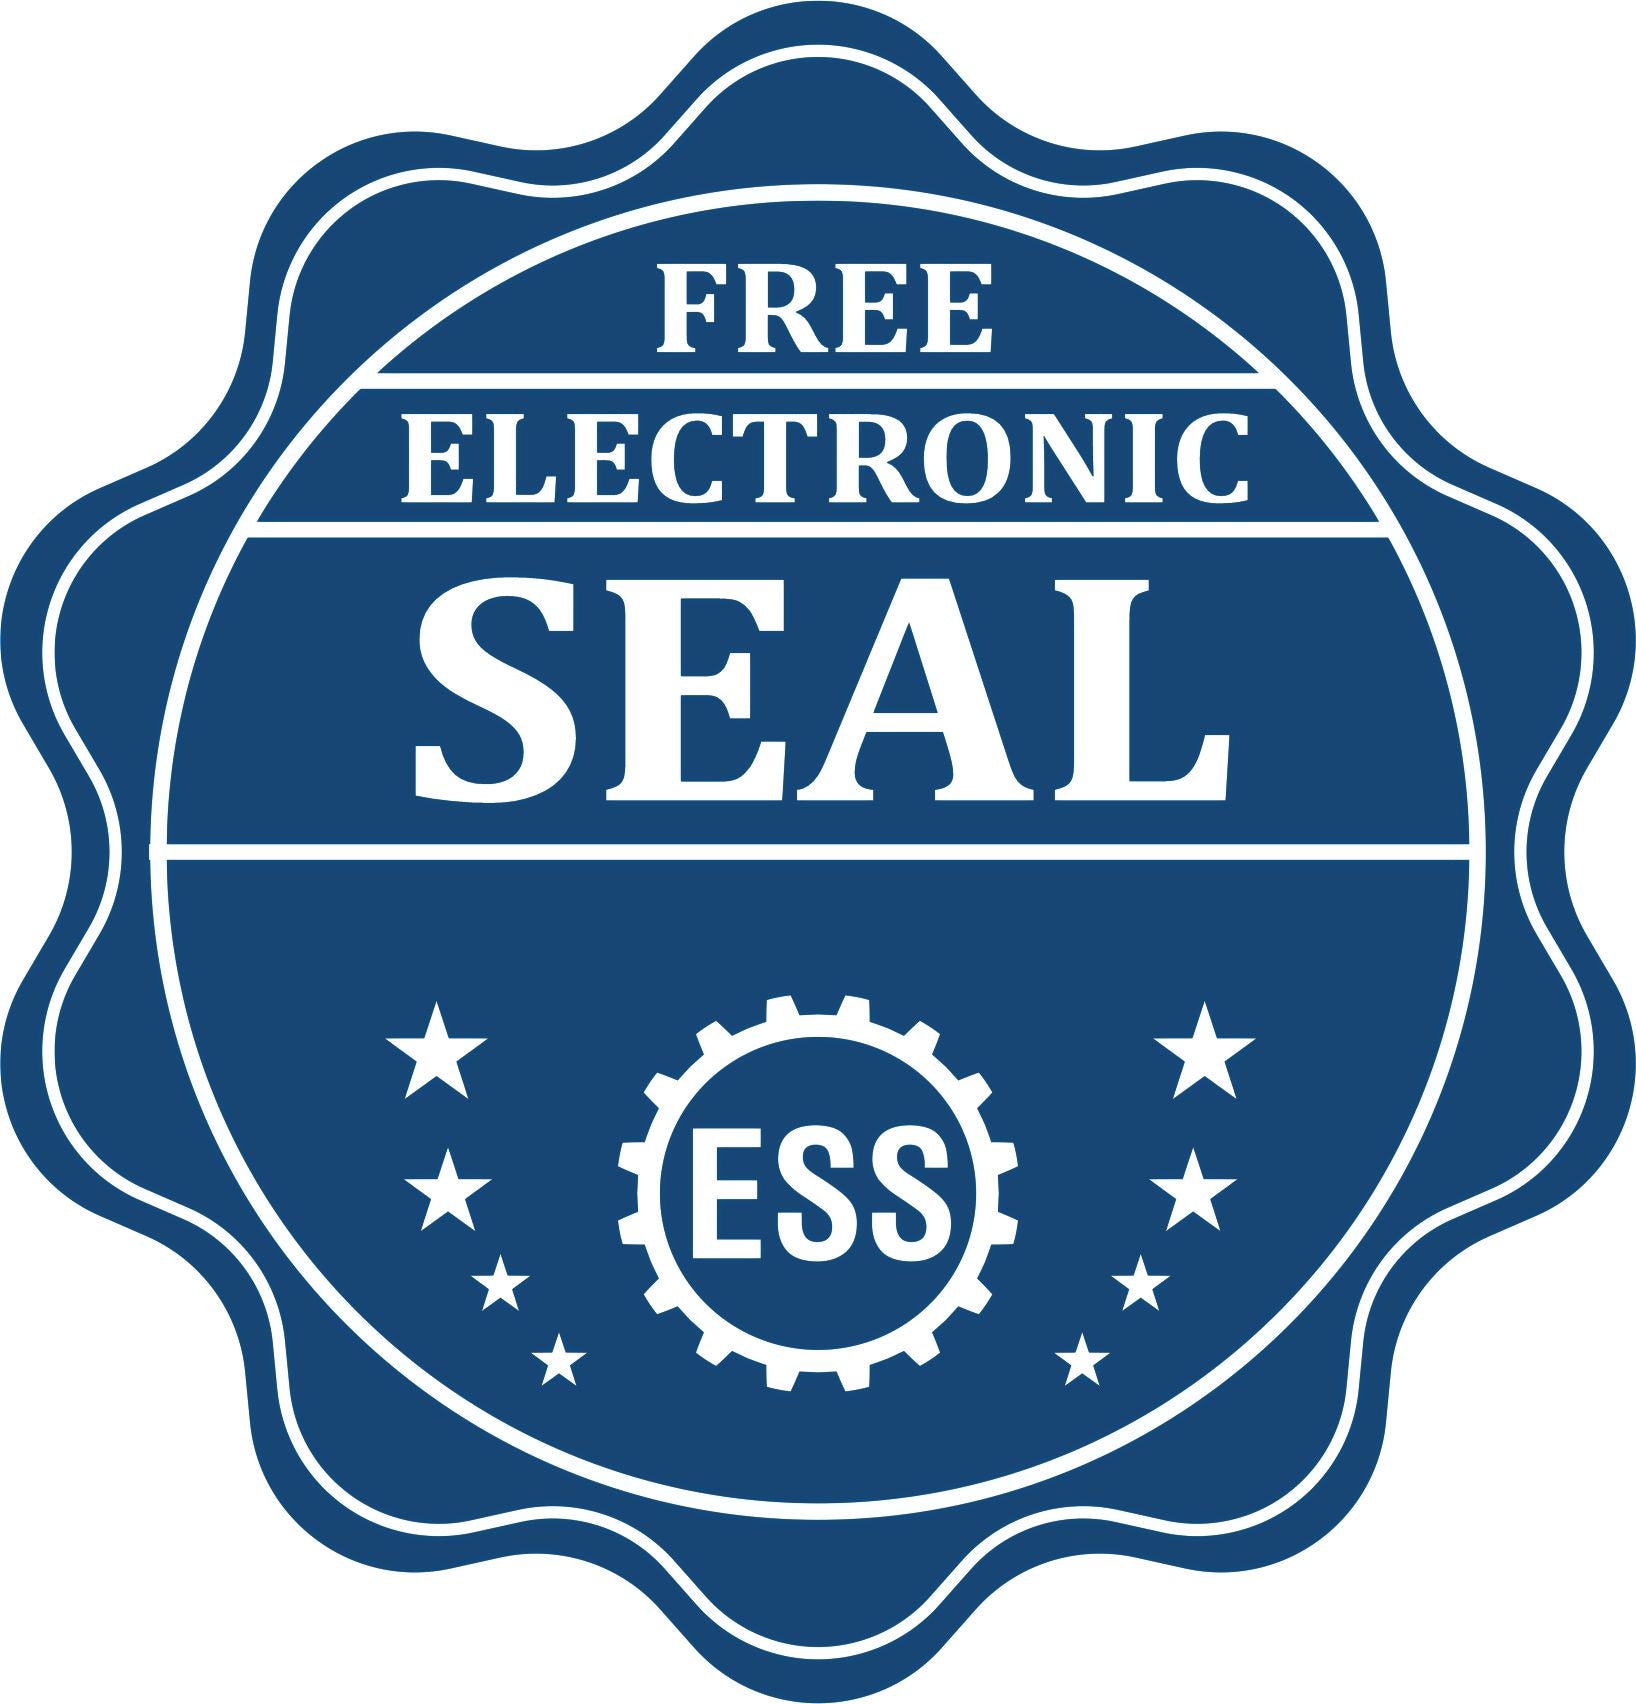 A badge showing a free electronic seal for the Self-Inking Connecticut Landscape Architect Stamp with stars and the ESS gear on the emblem.